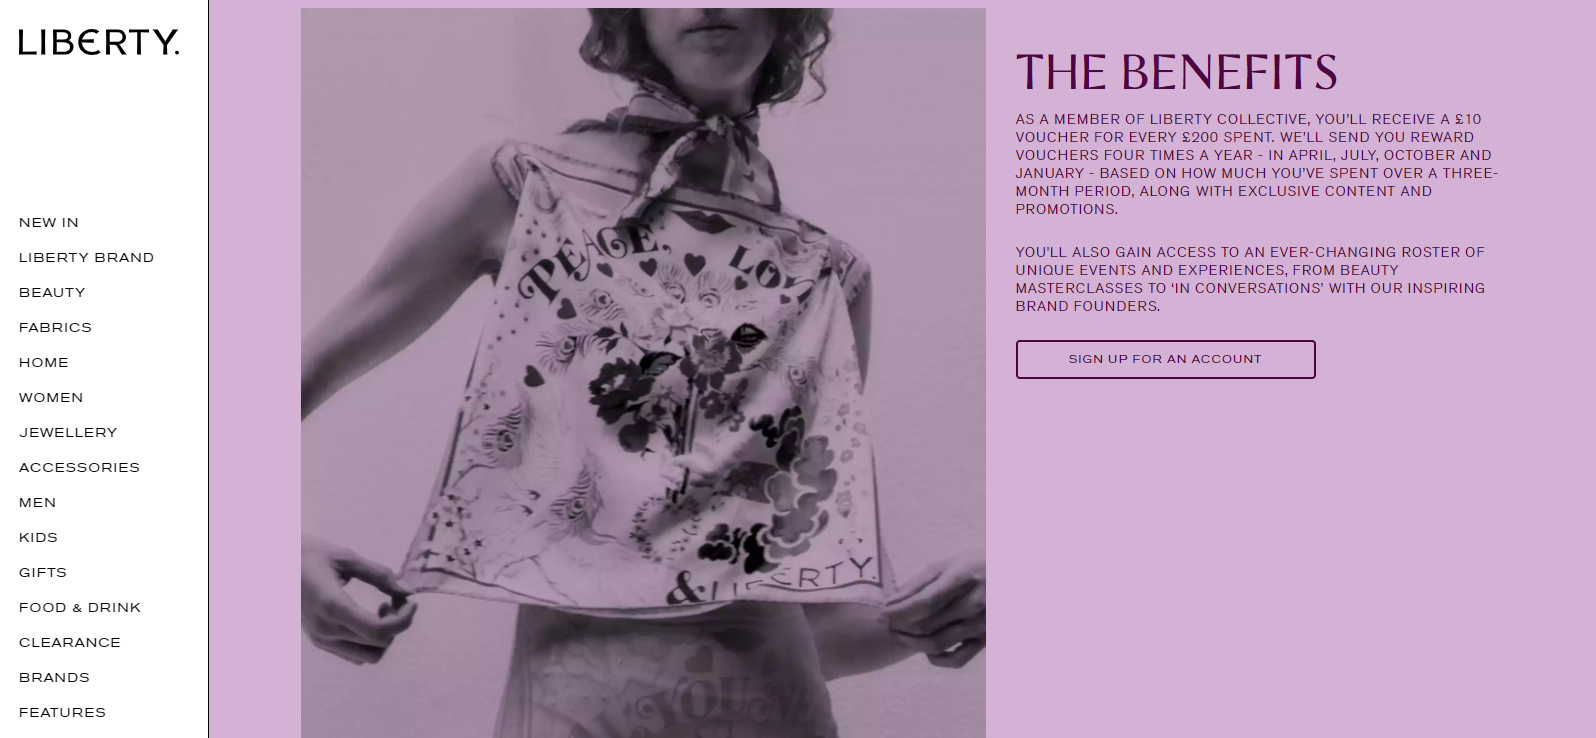 The loyalty program page for Liberty London